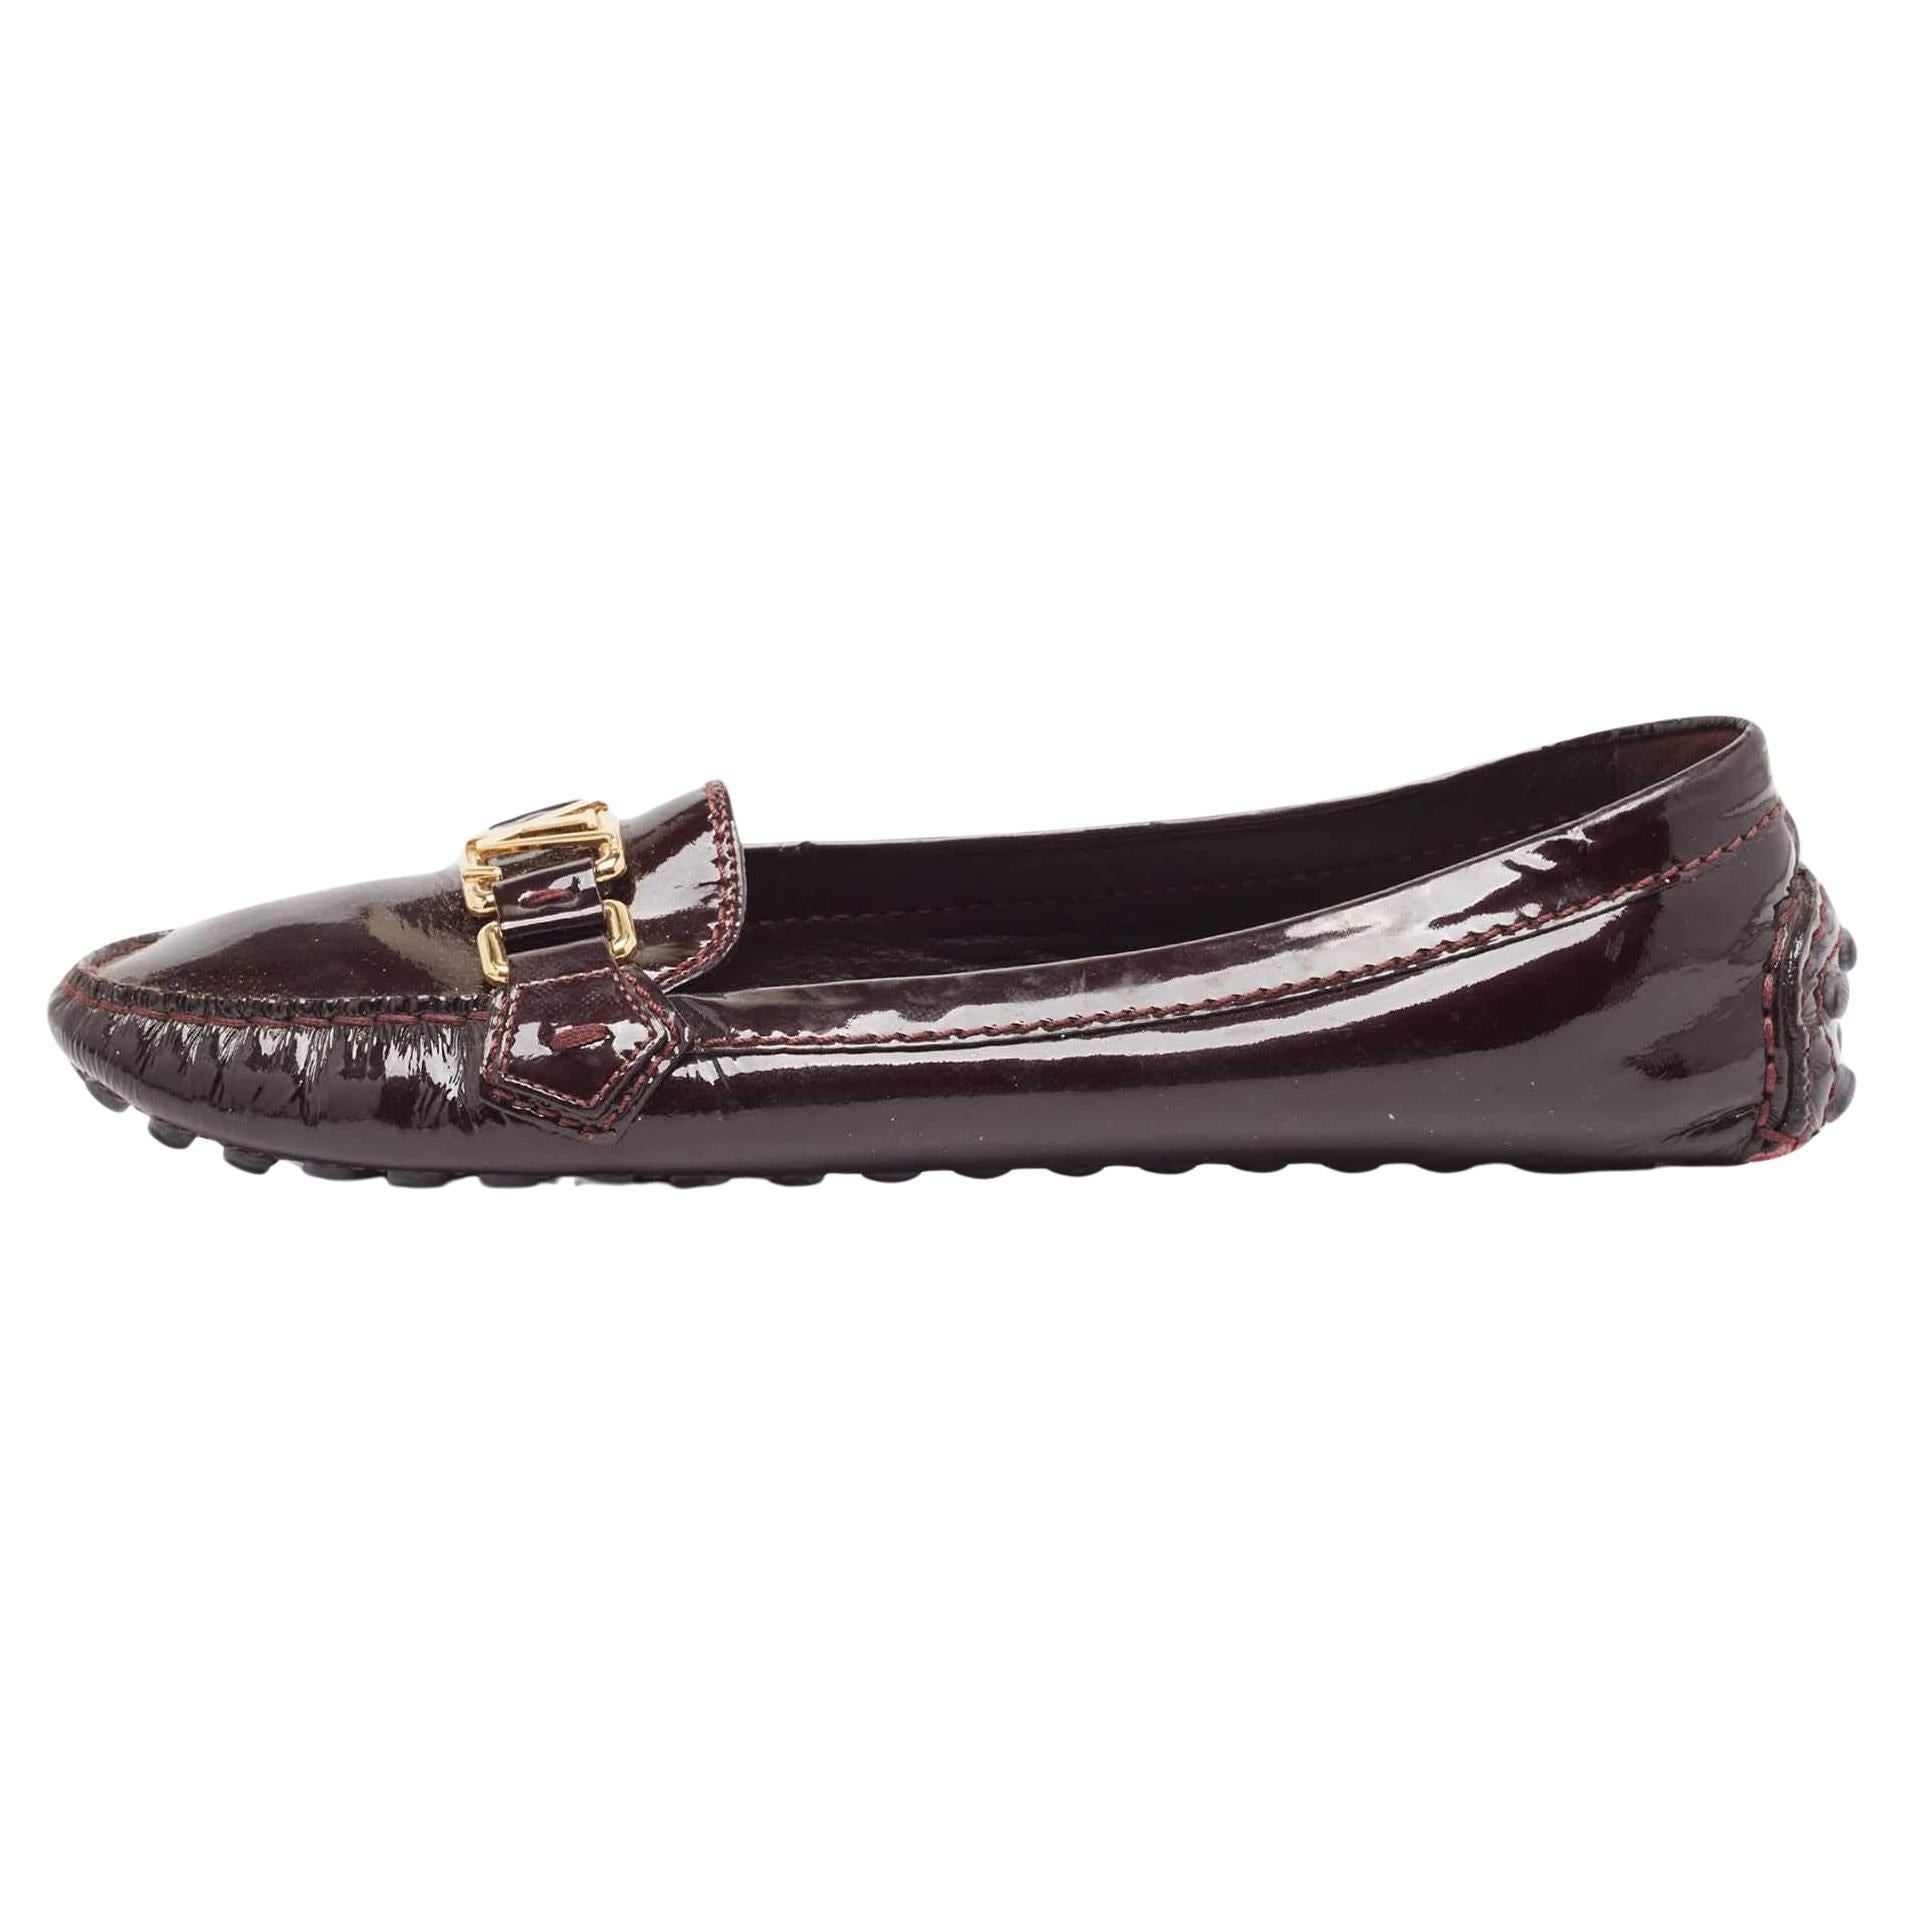 Louis Vuitton Burgundy Patent Leather Oxford Loafers Size 39 For Sale